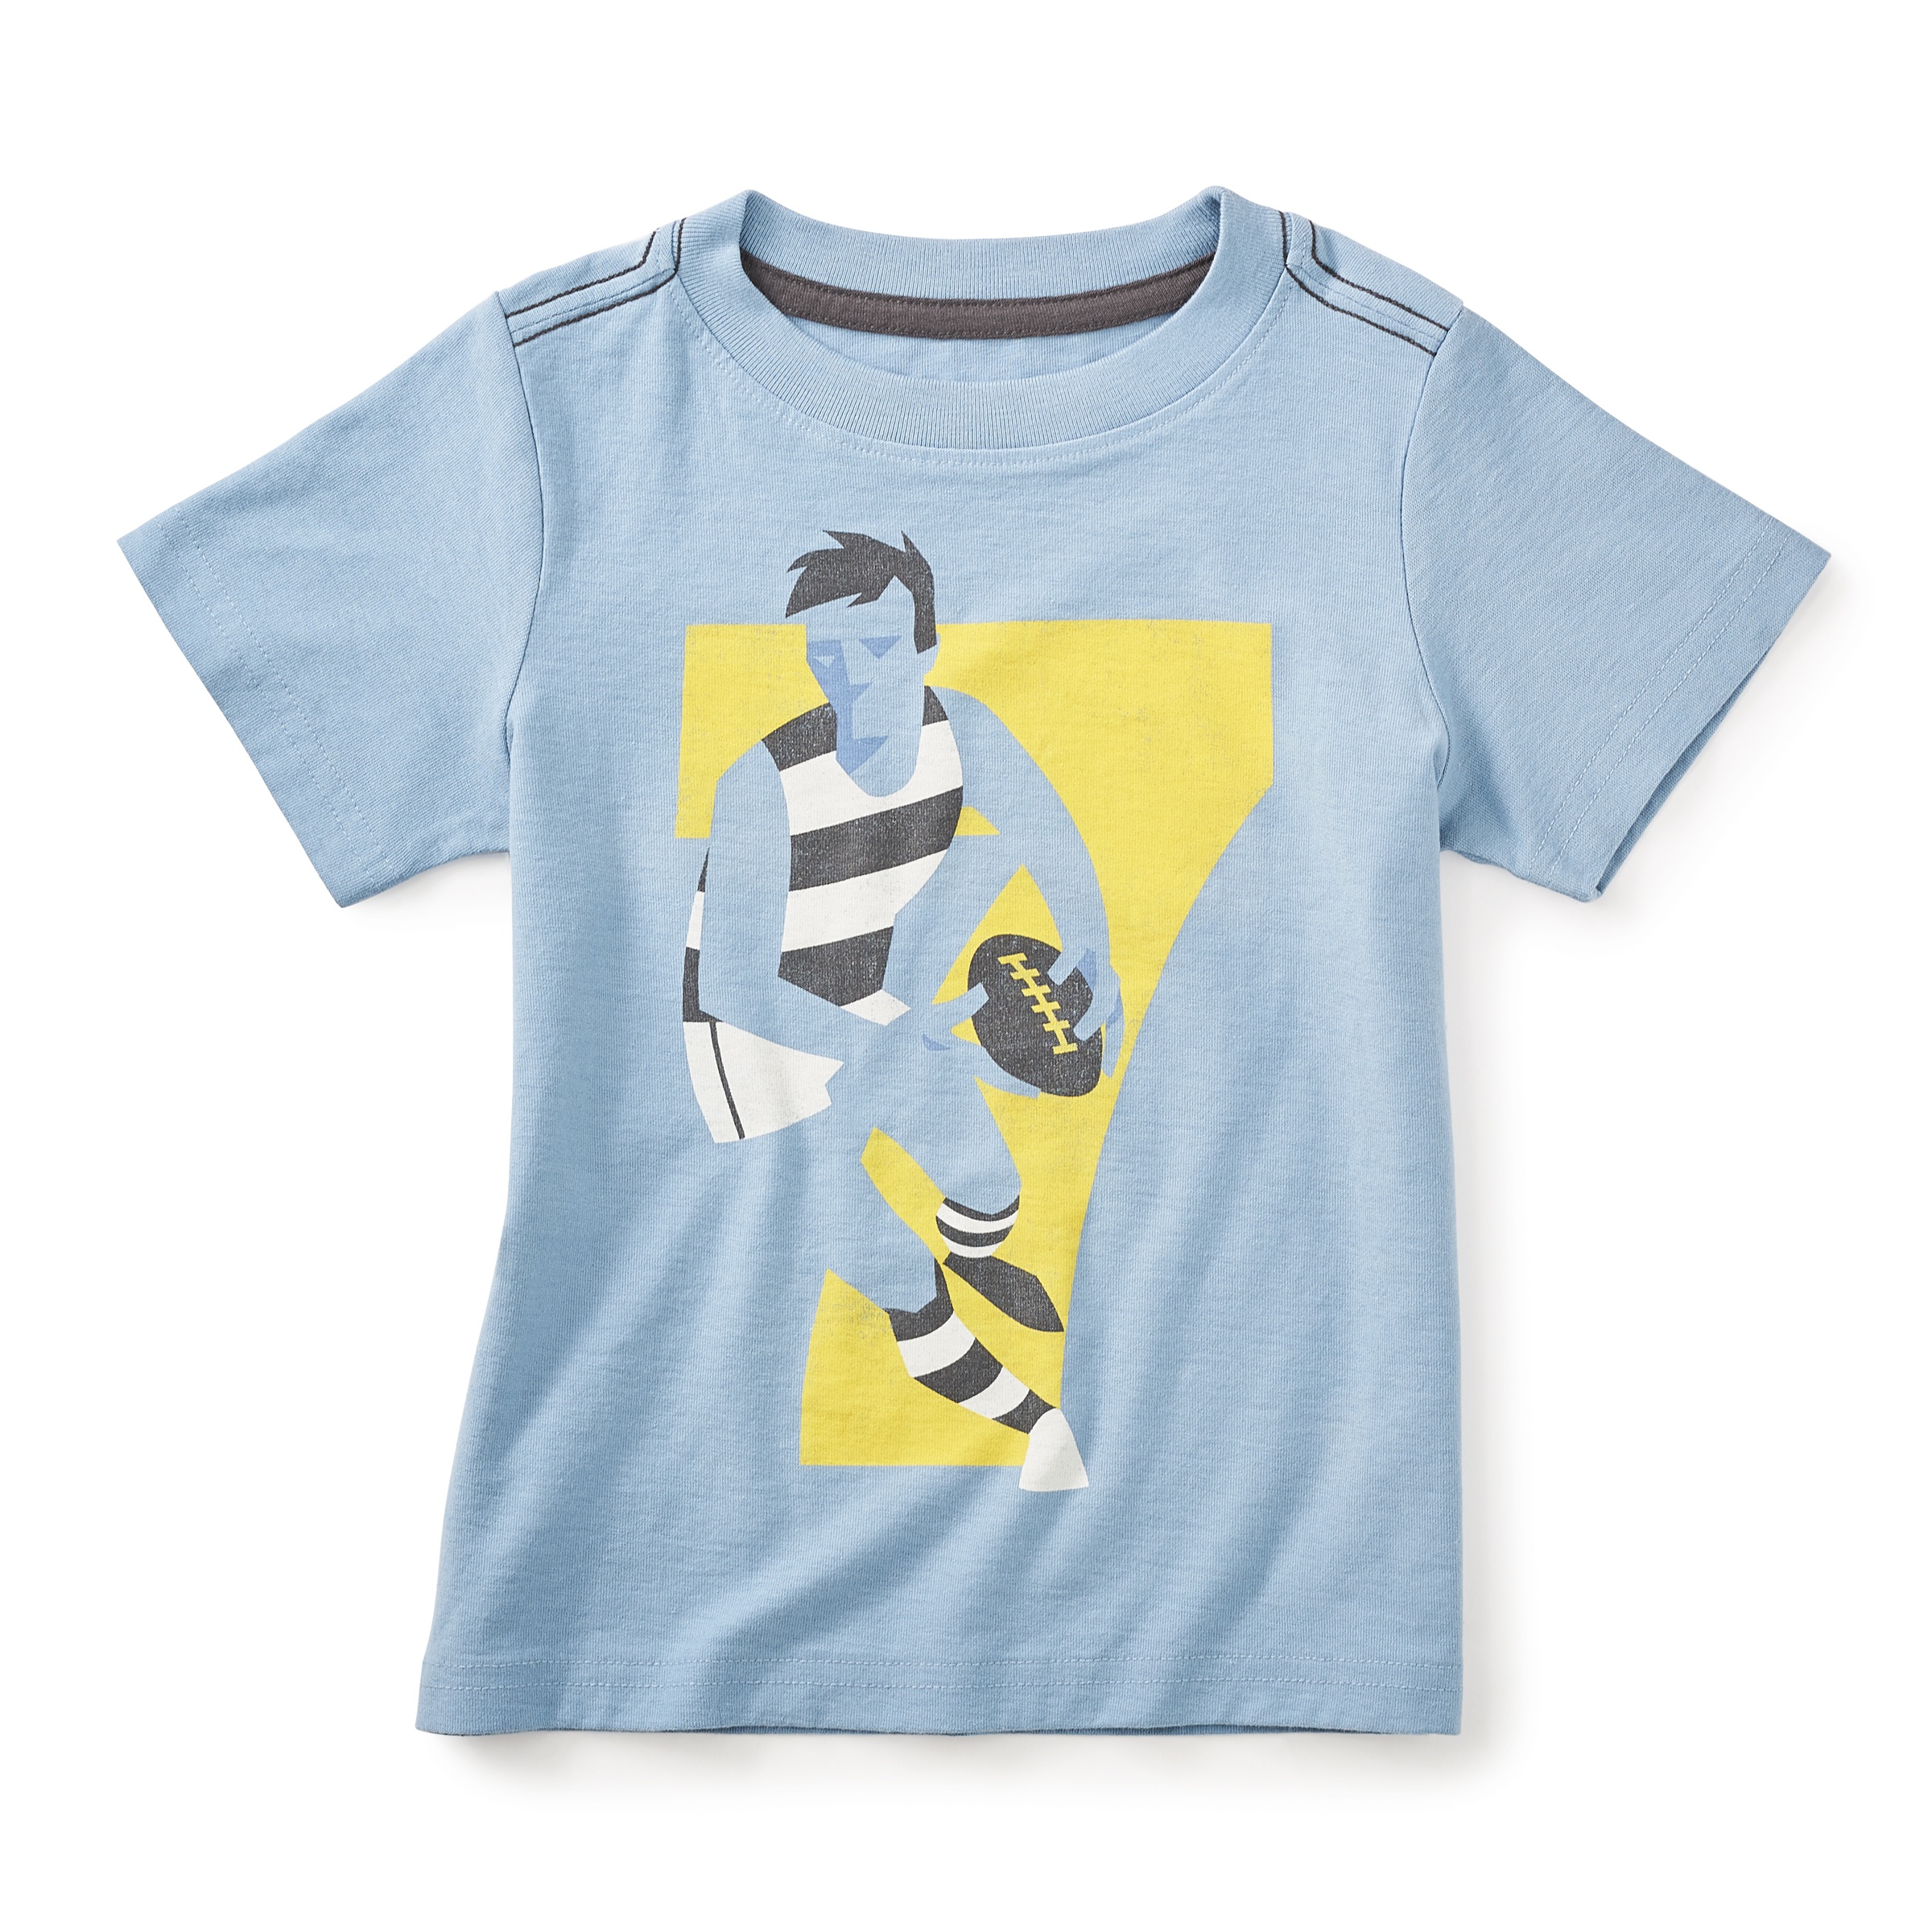 Aussie Rules Graphic Tee | Tea Collection